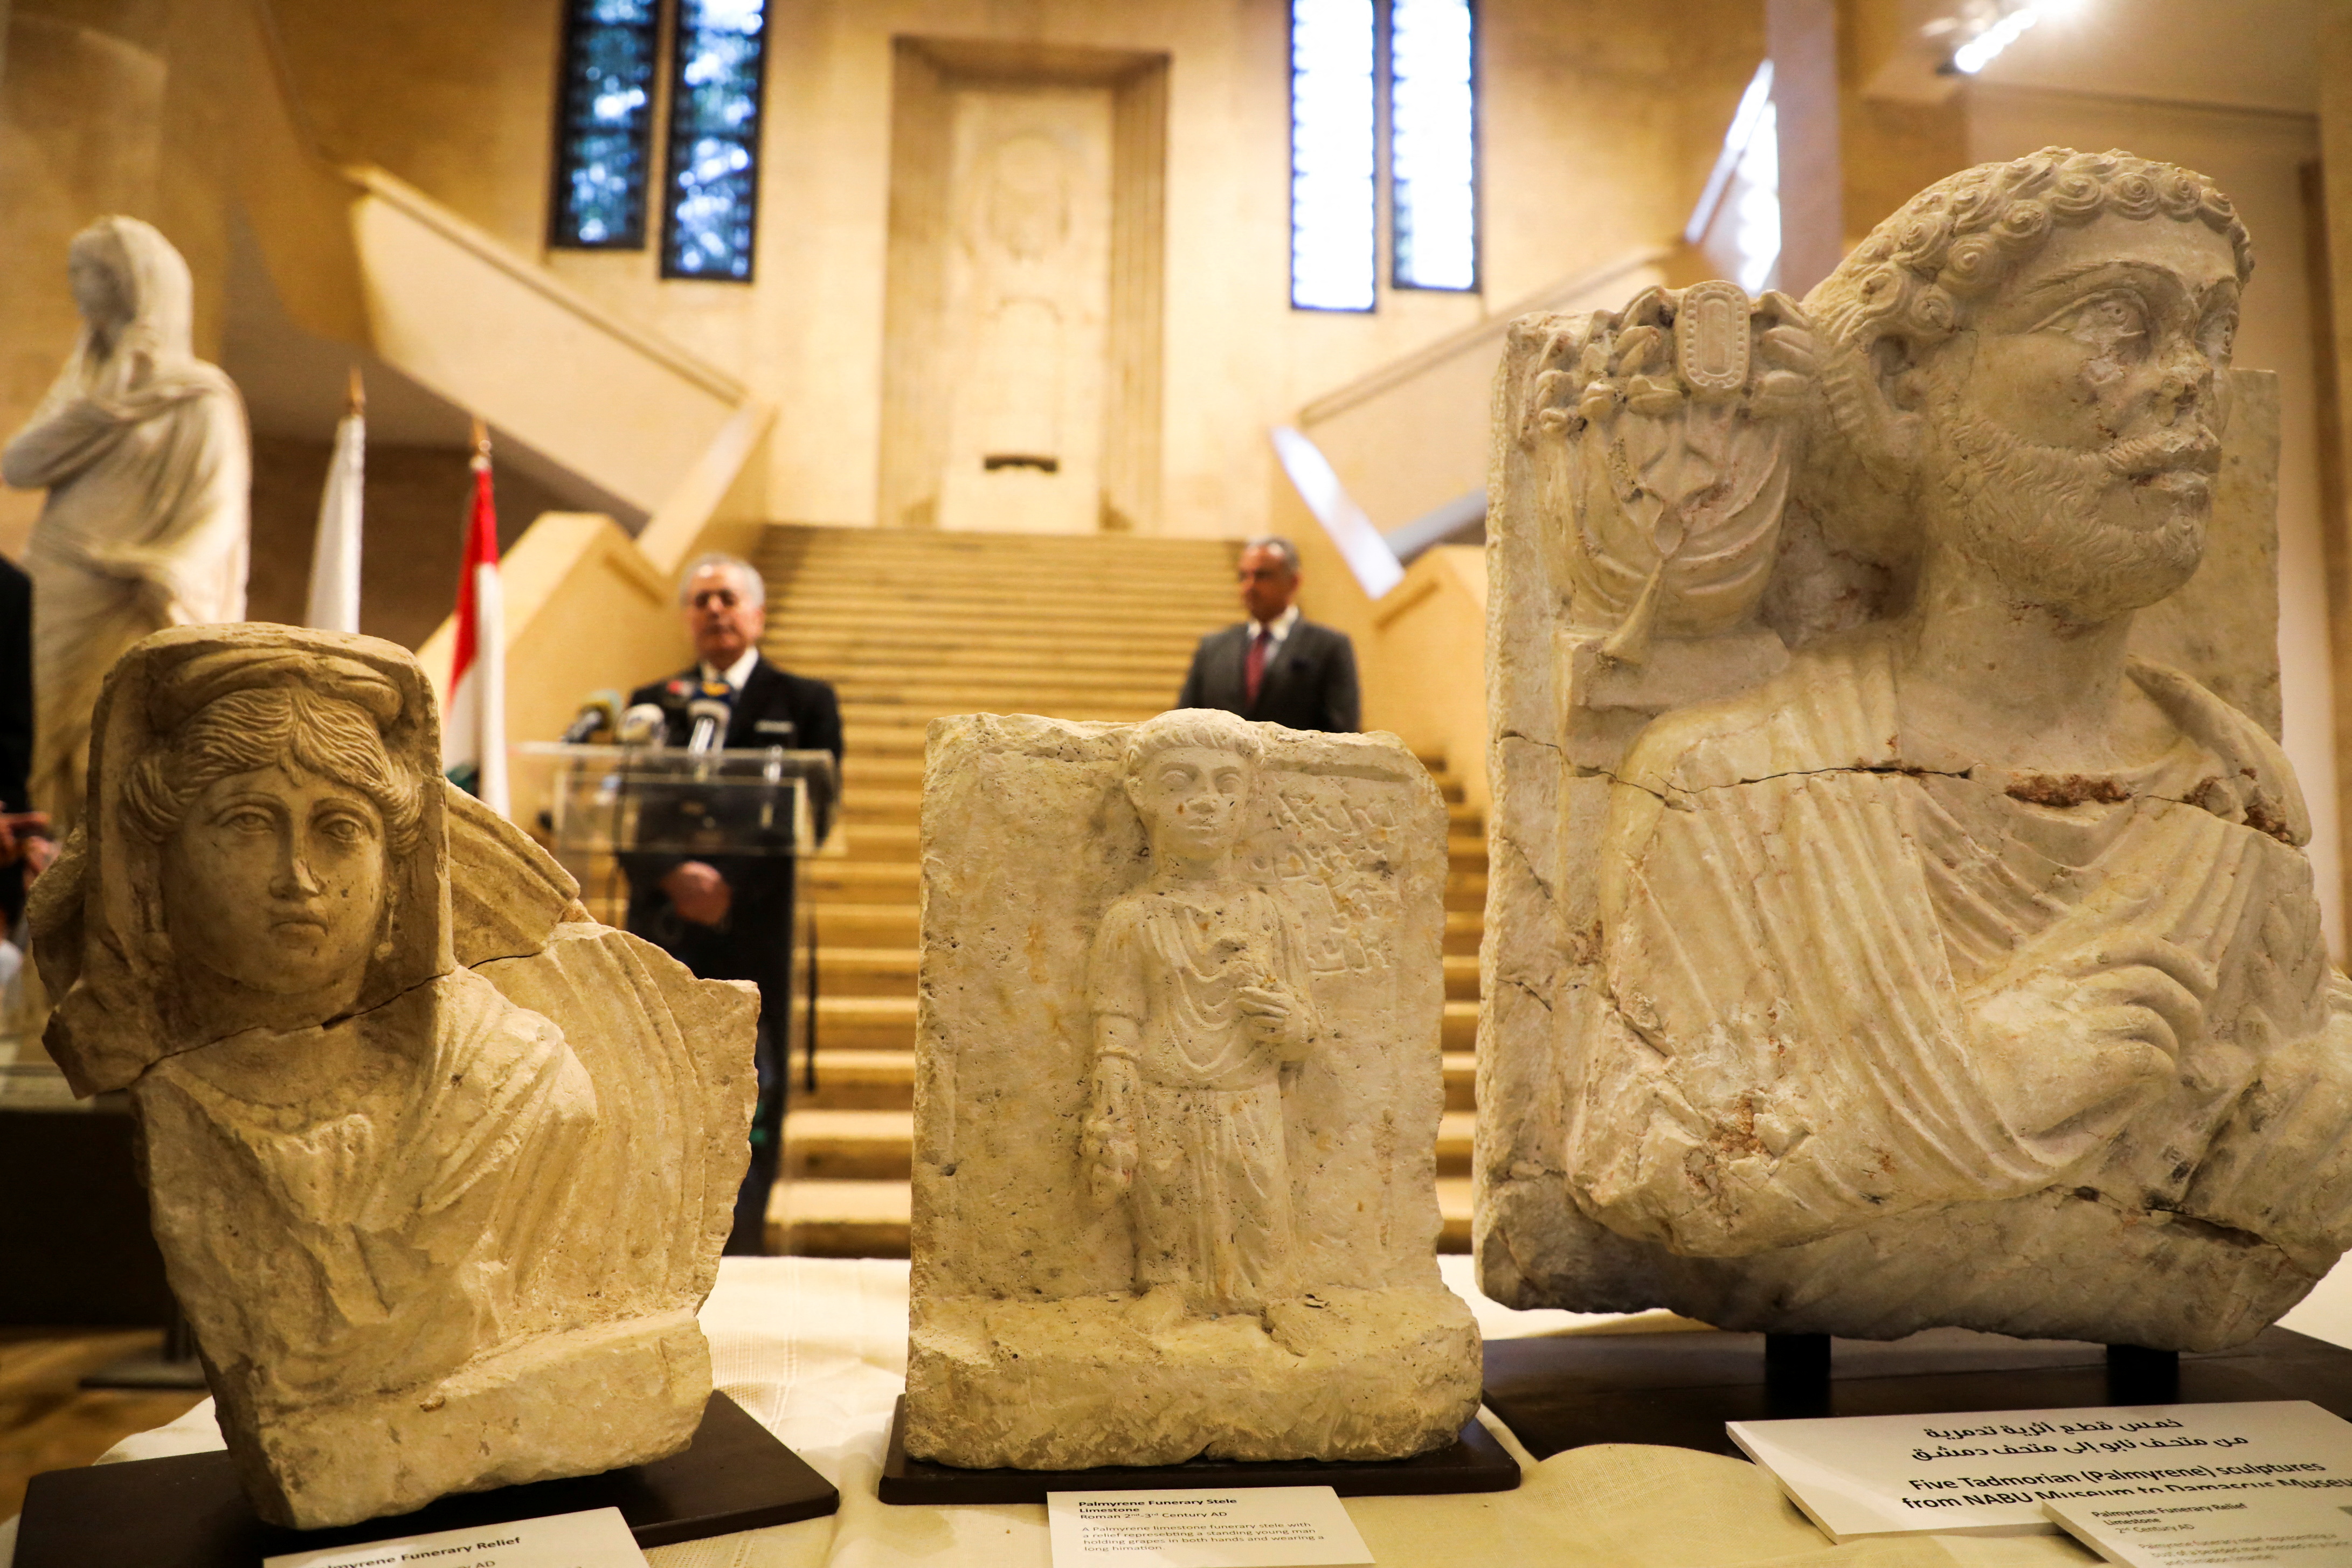 Roman artifacts from the ancient city of Palmyra are pictured during a handover ceremony hosted by Lebanon's National Museum in Beirut